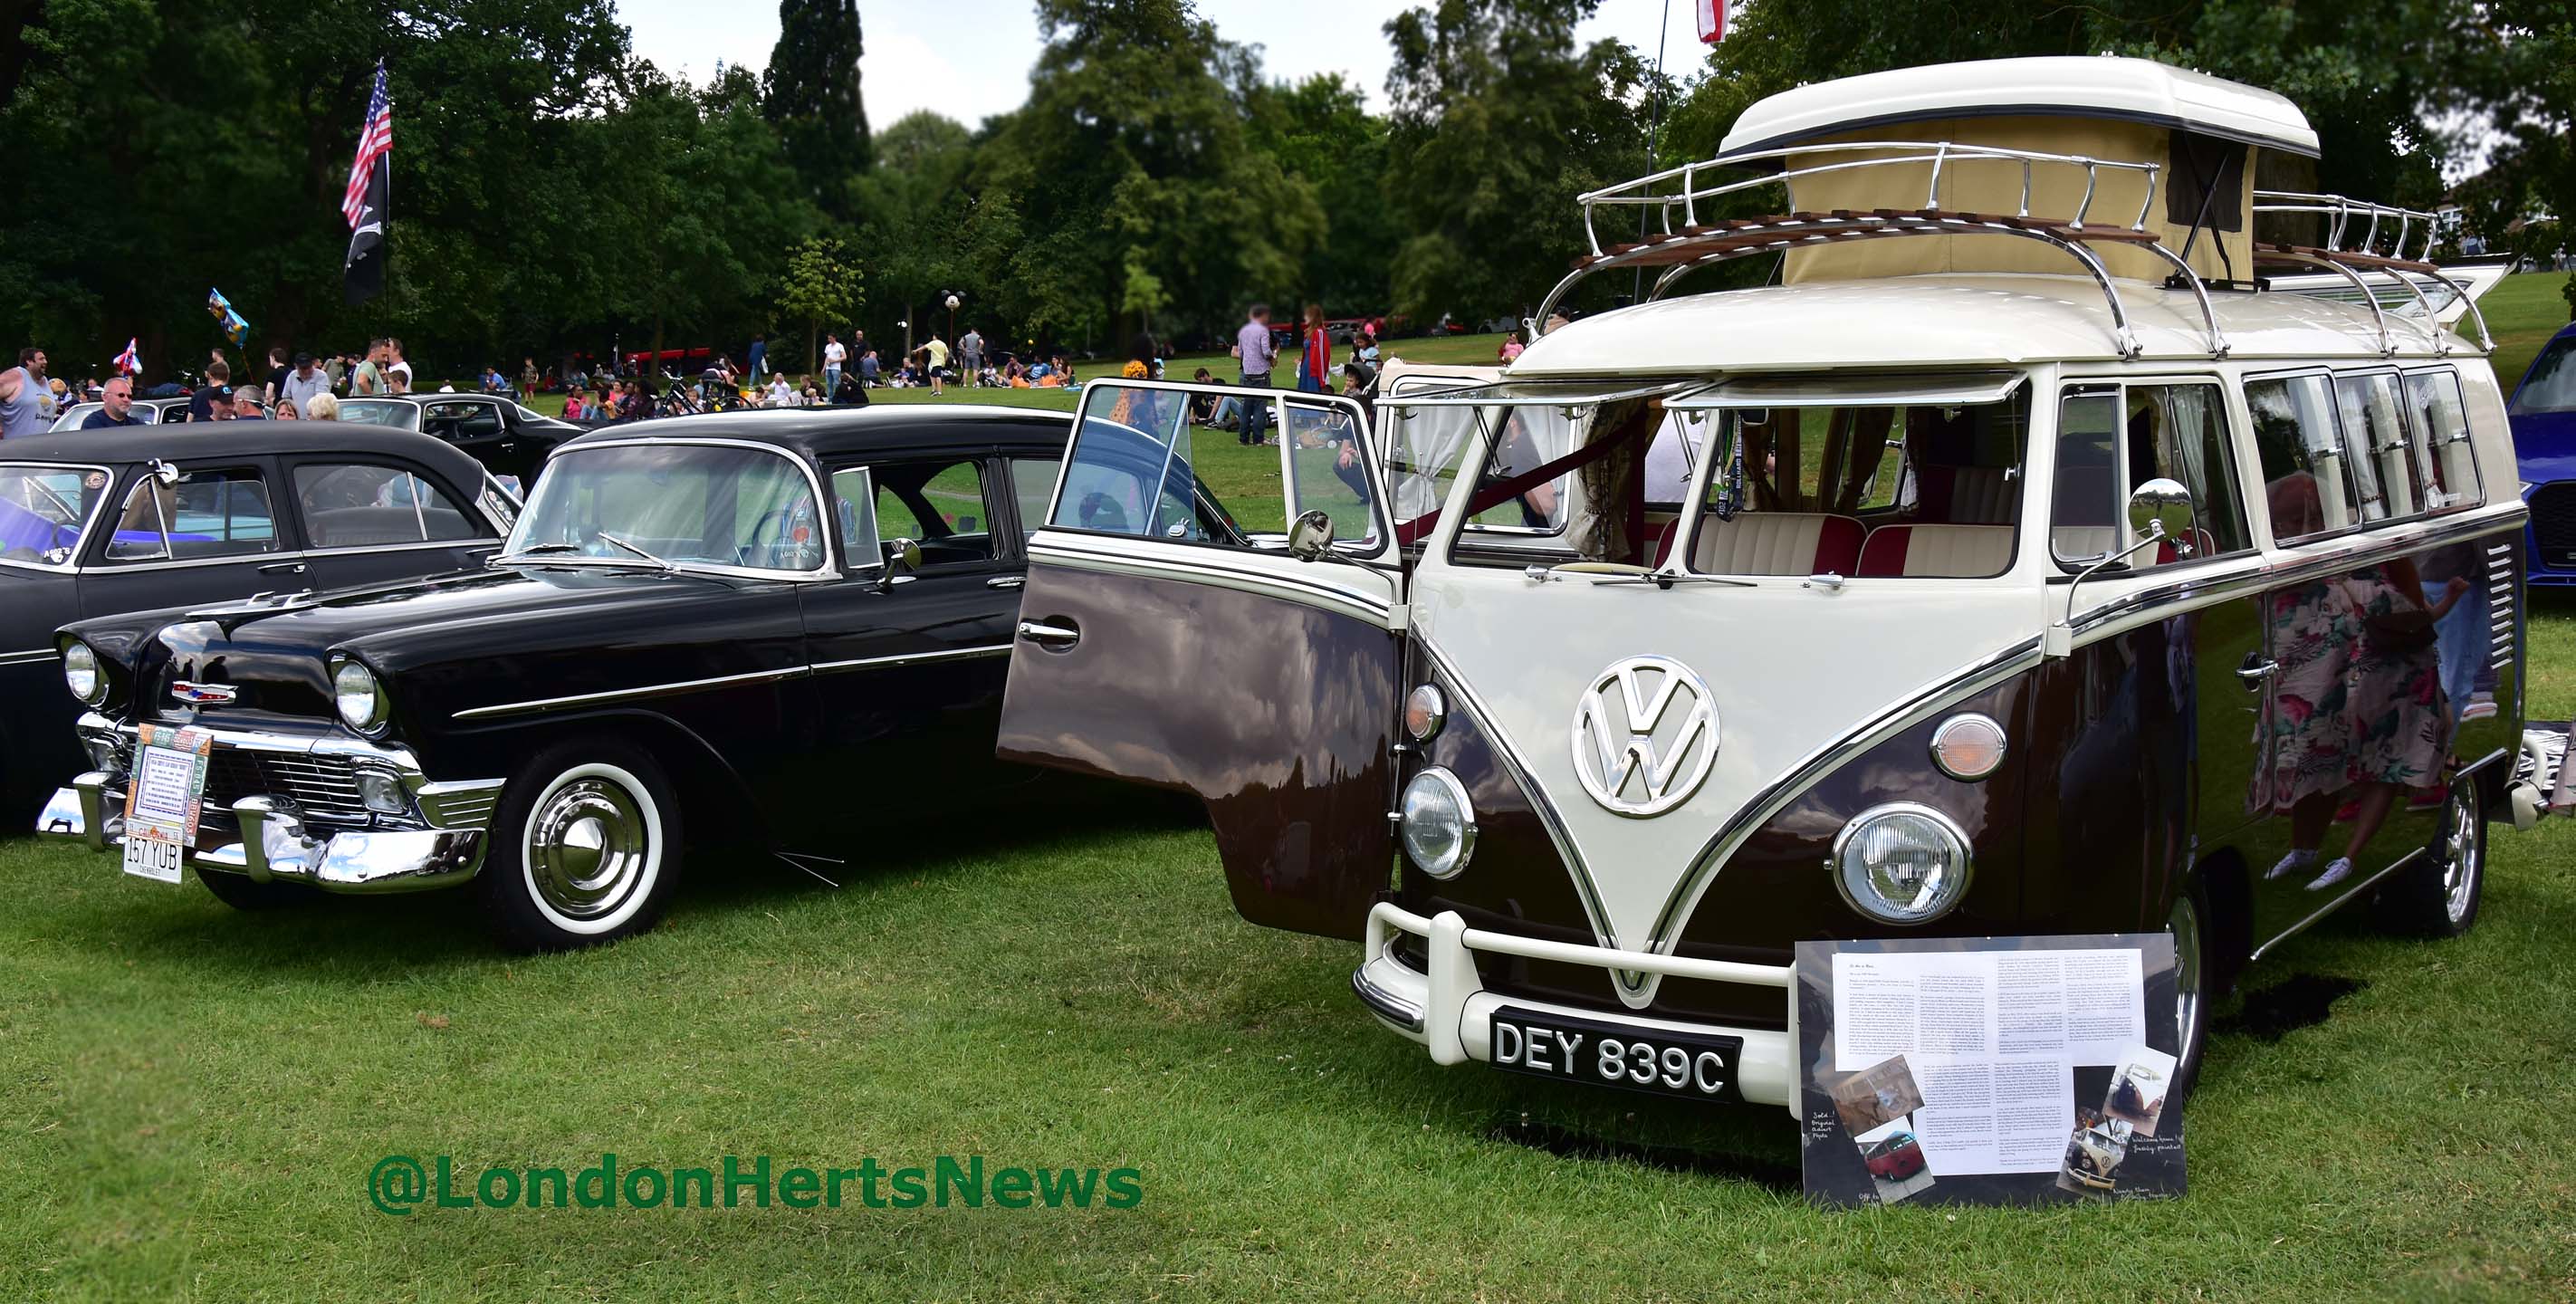 Cars in barnet Park 2019, London's biggest Barnet car show Photos and Video